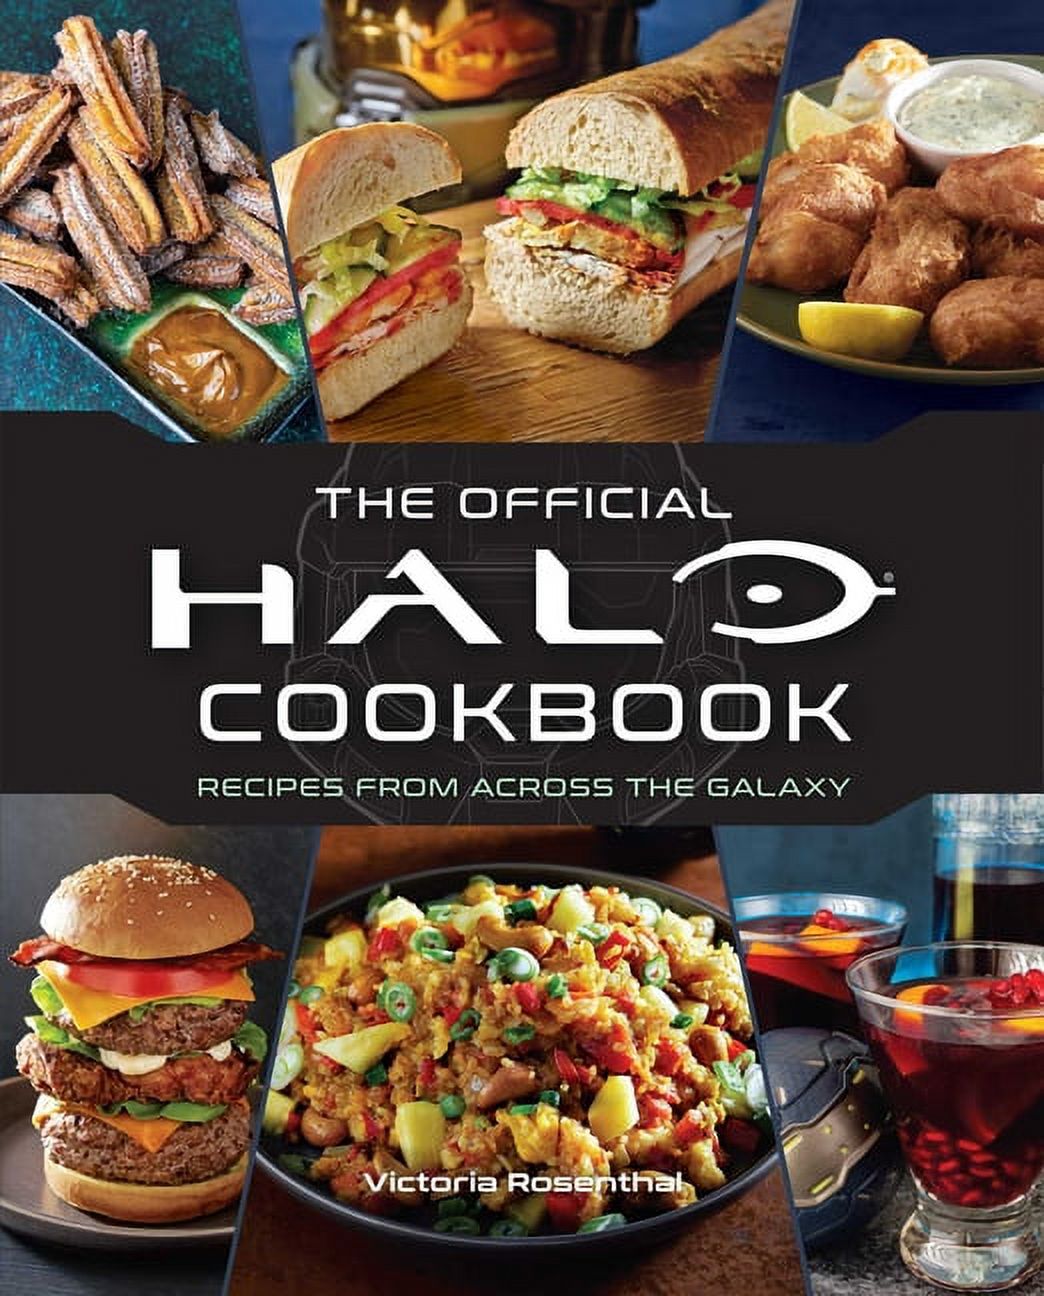 Halo: The Official Cookbook (Hardcover) - image 1 of 1